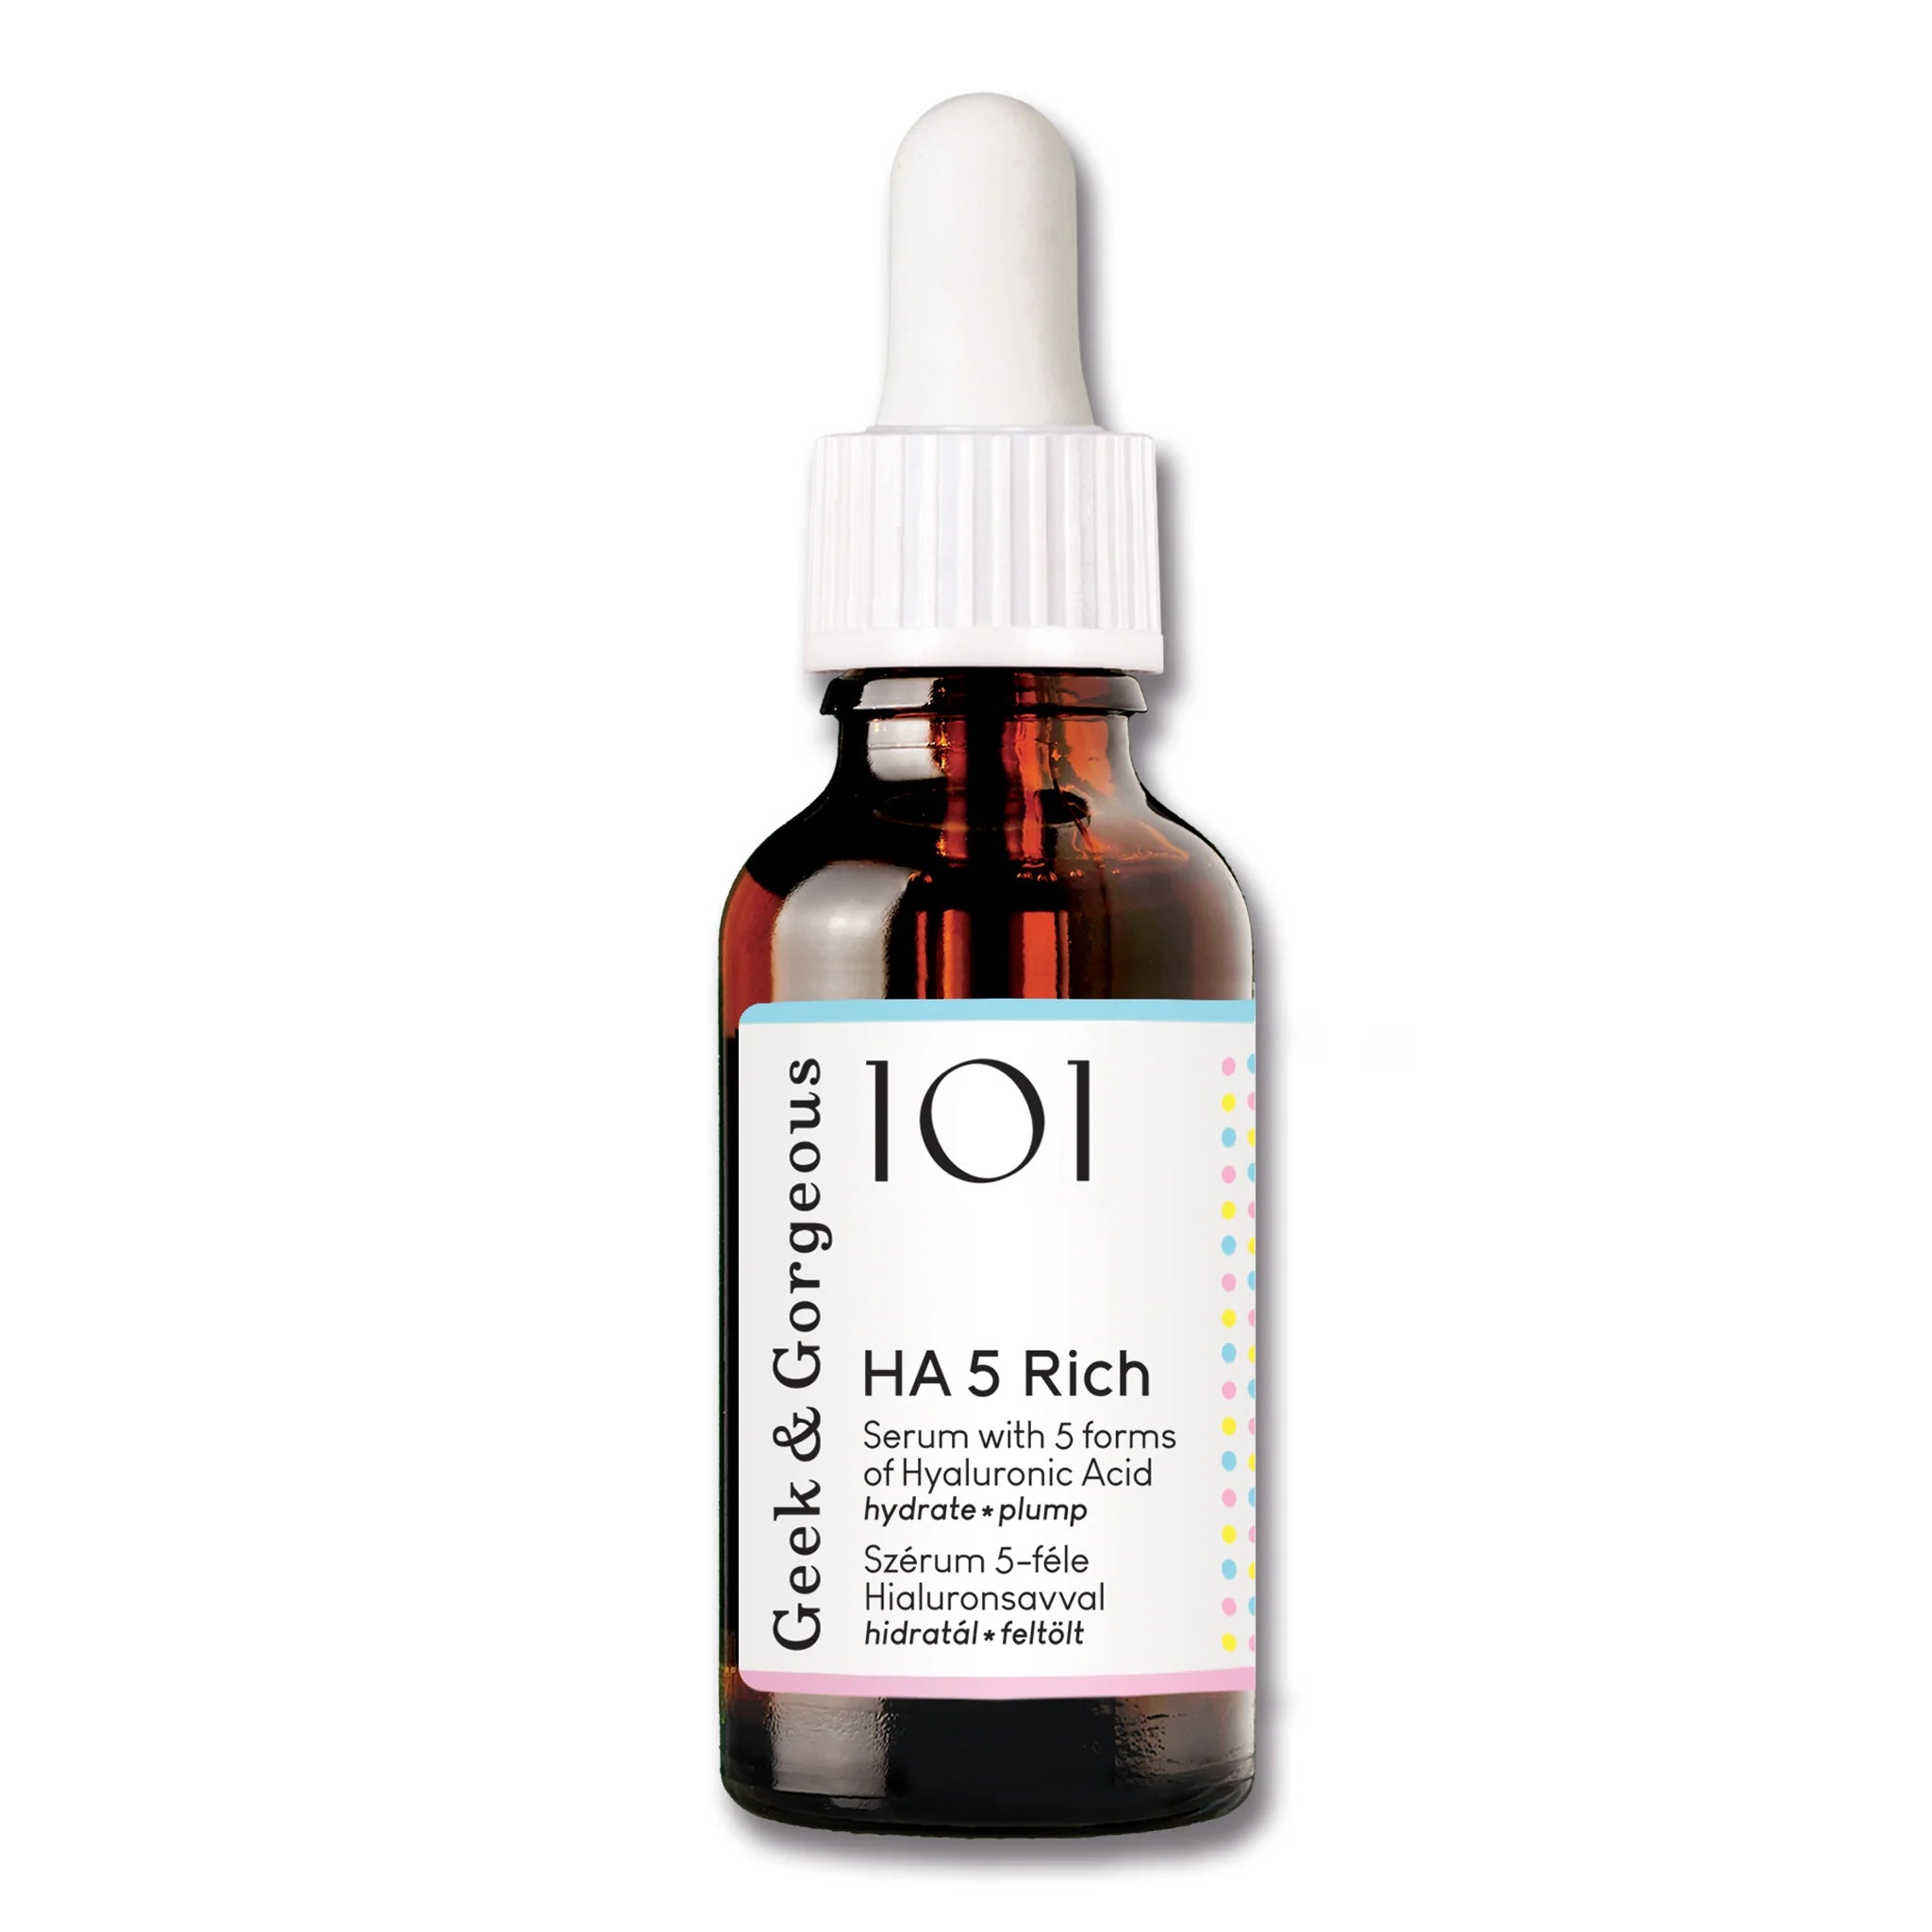 HA 5 Rich Serum with 5 Forms of Hyaluronic Acid